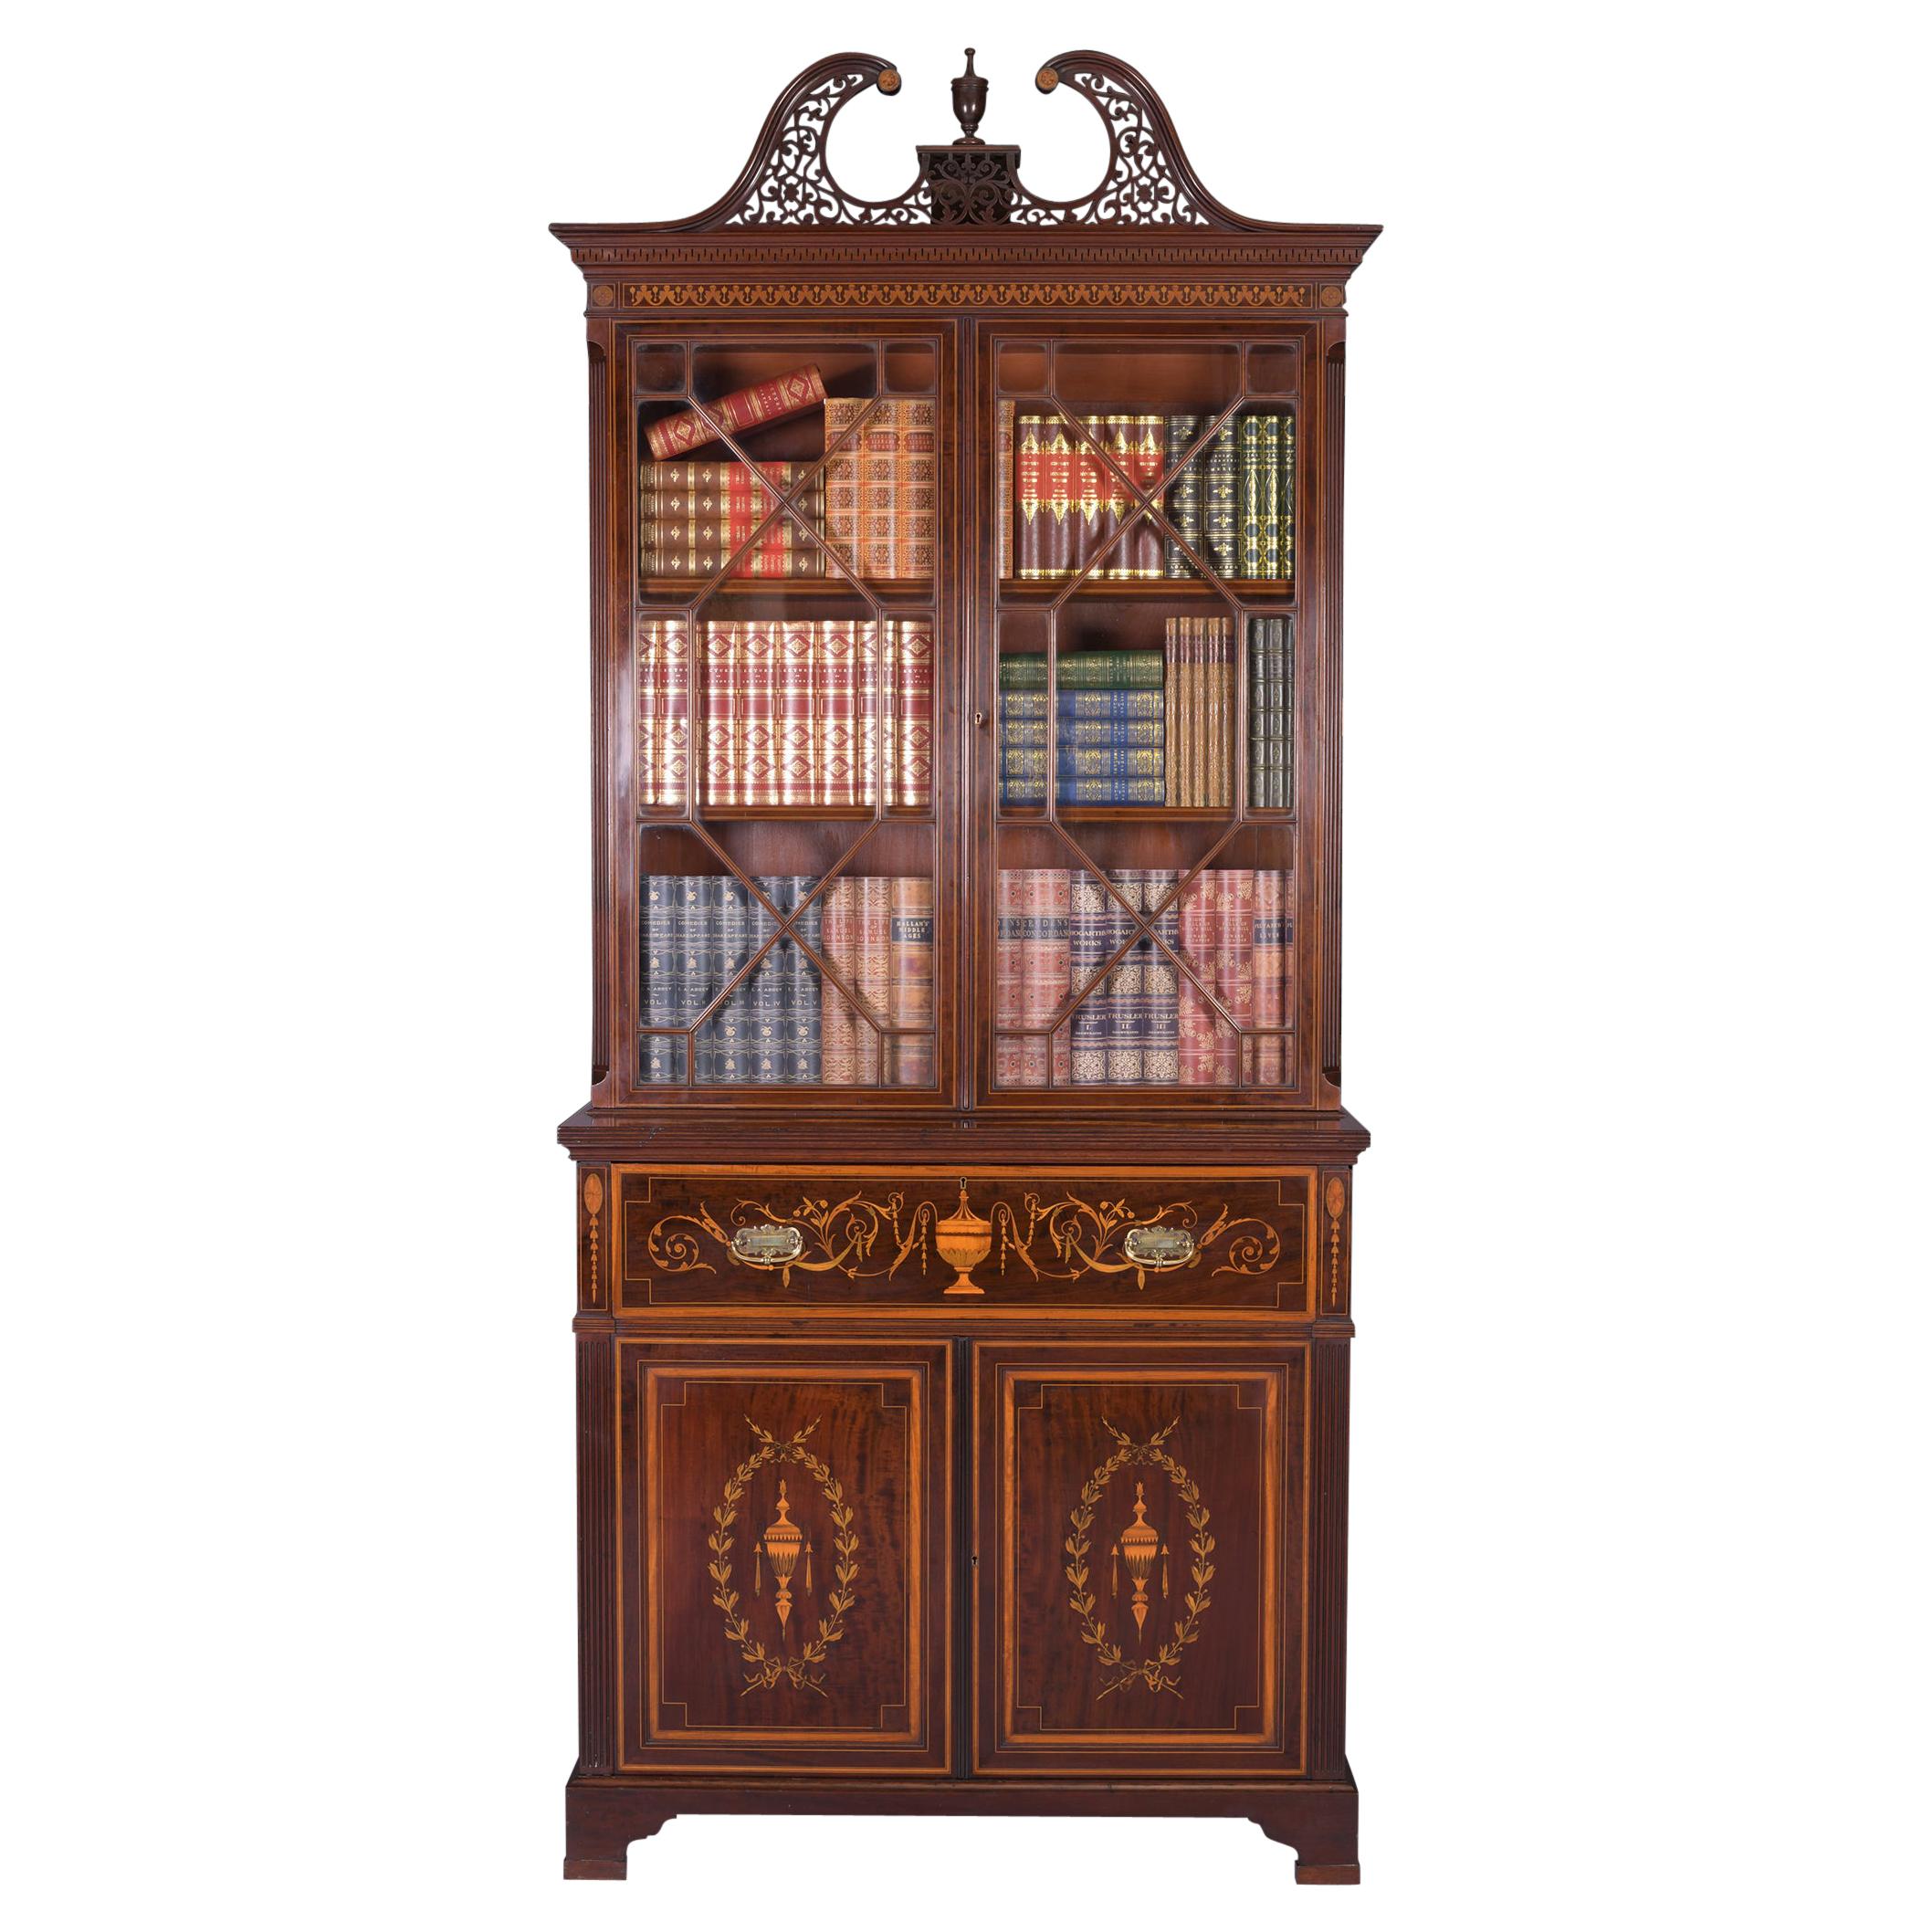 Late 19th Century English Secretaire Bookcase by Edwards & Roberts